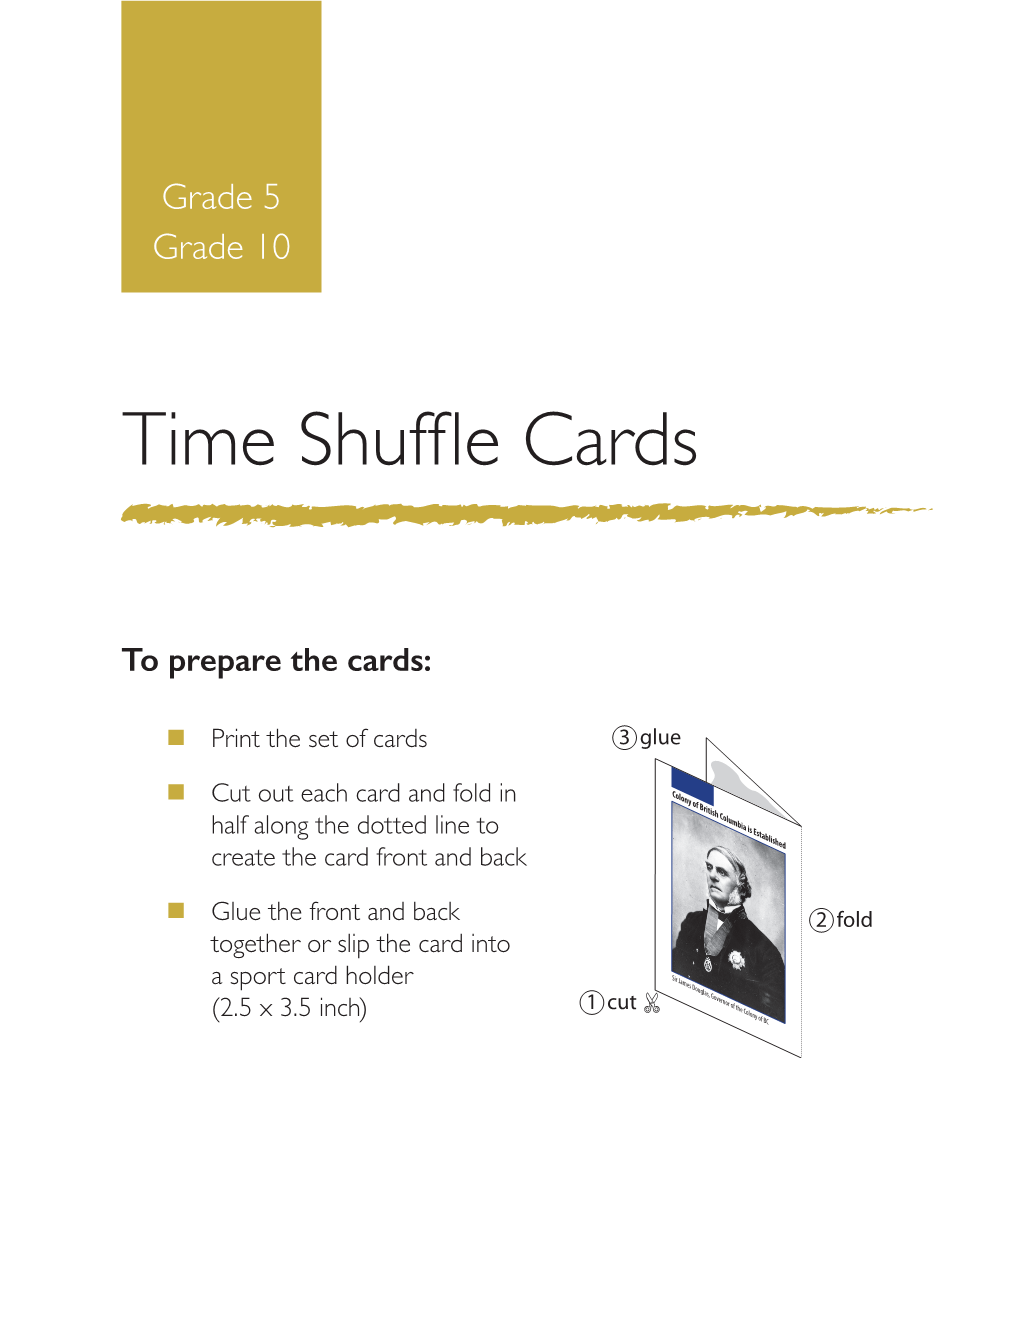 Time Shuffle Cards